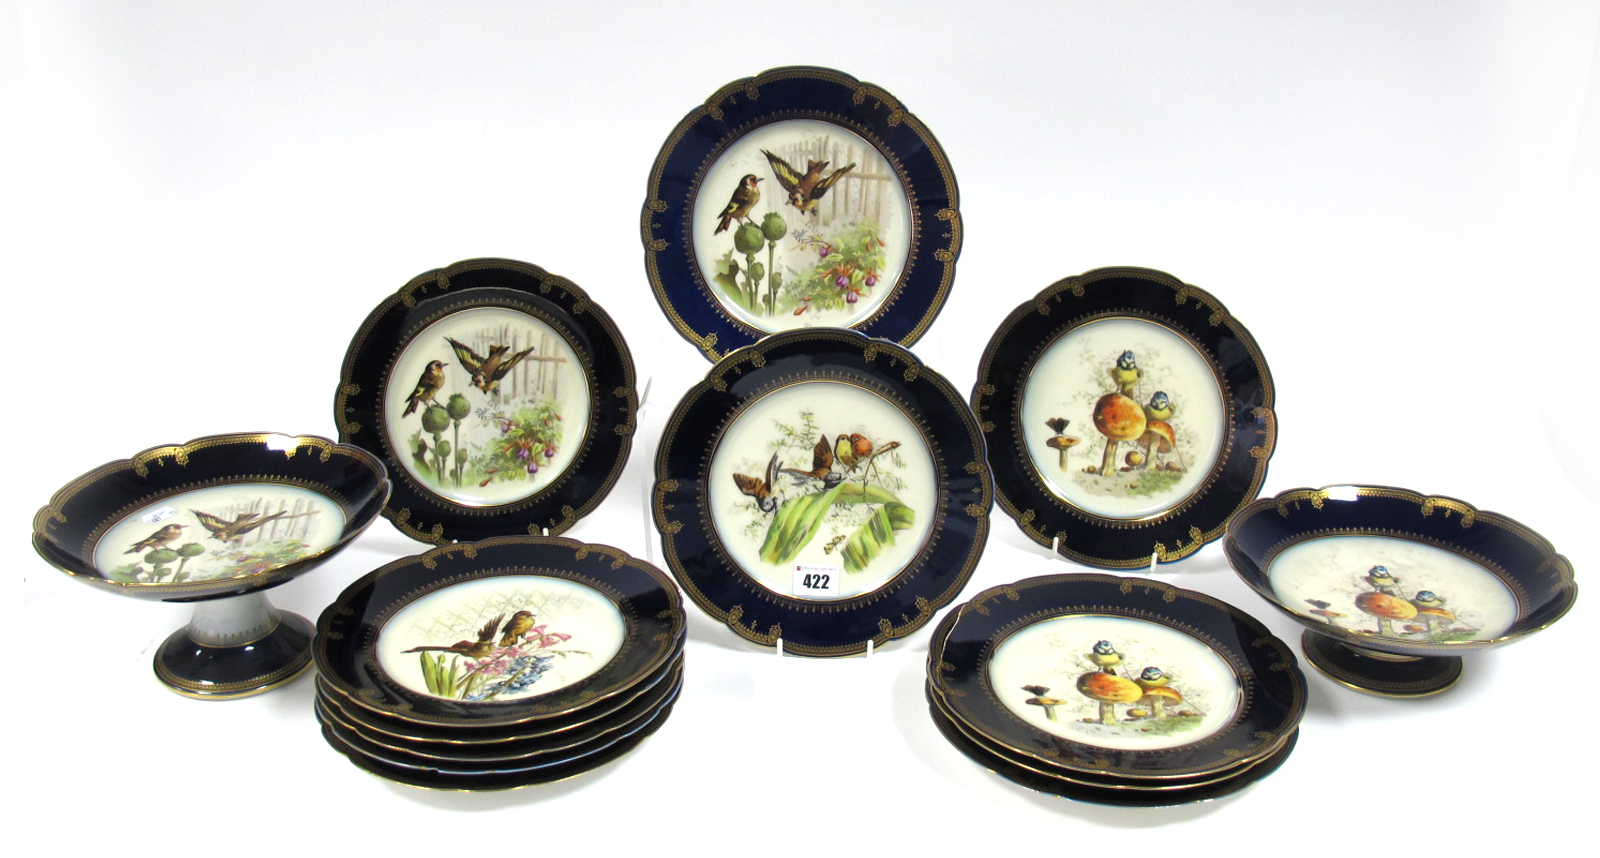 A Late XIX Century Charles Field Haviland Limoges Dessert Service, printed and overpainted with